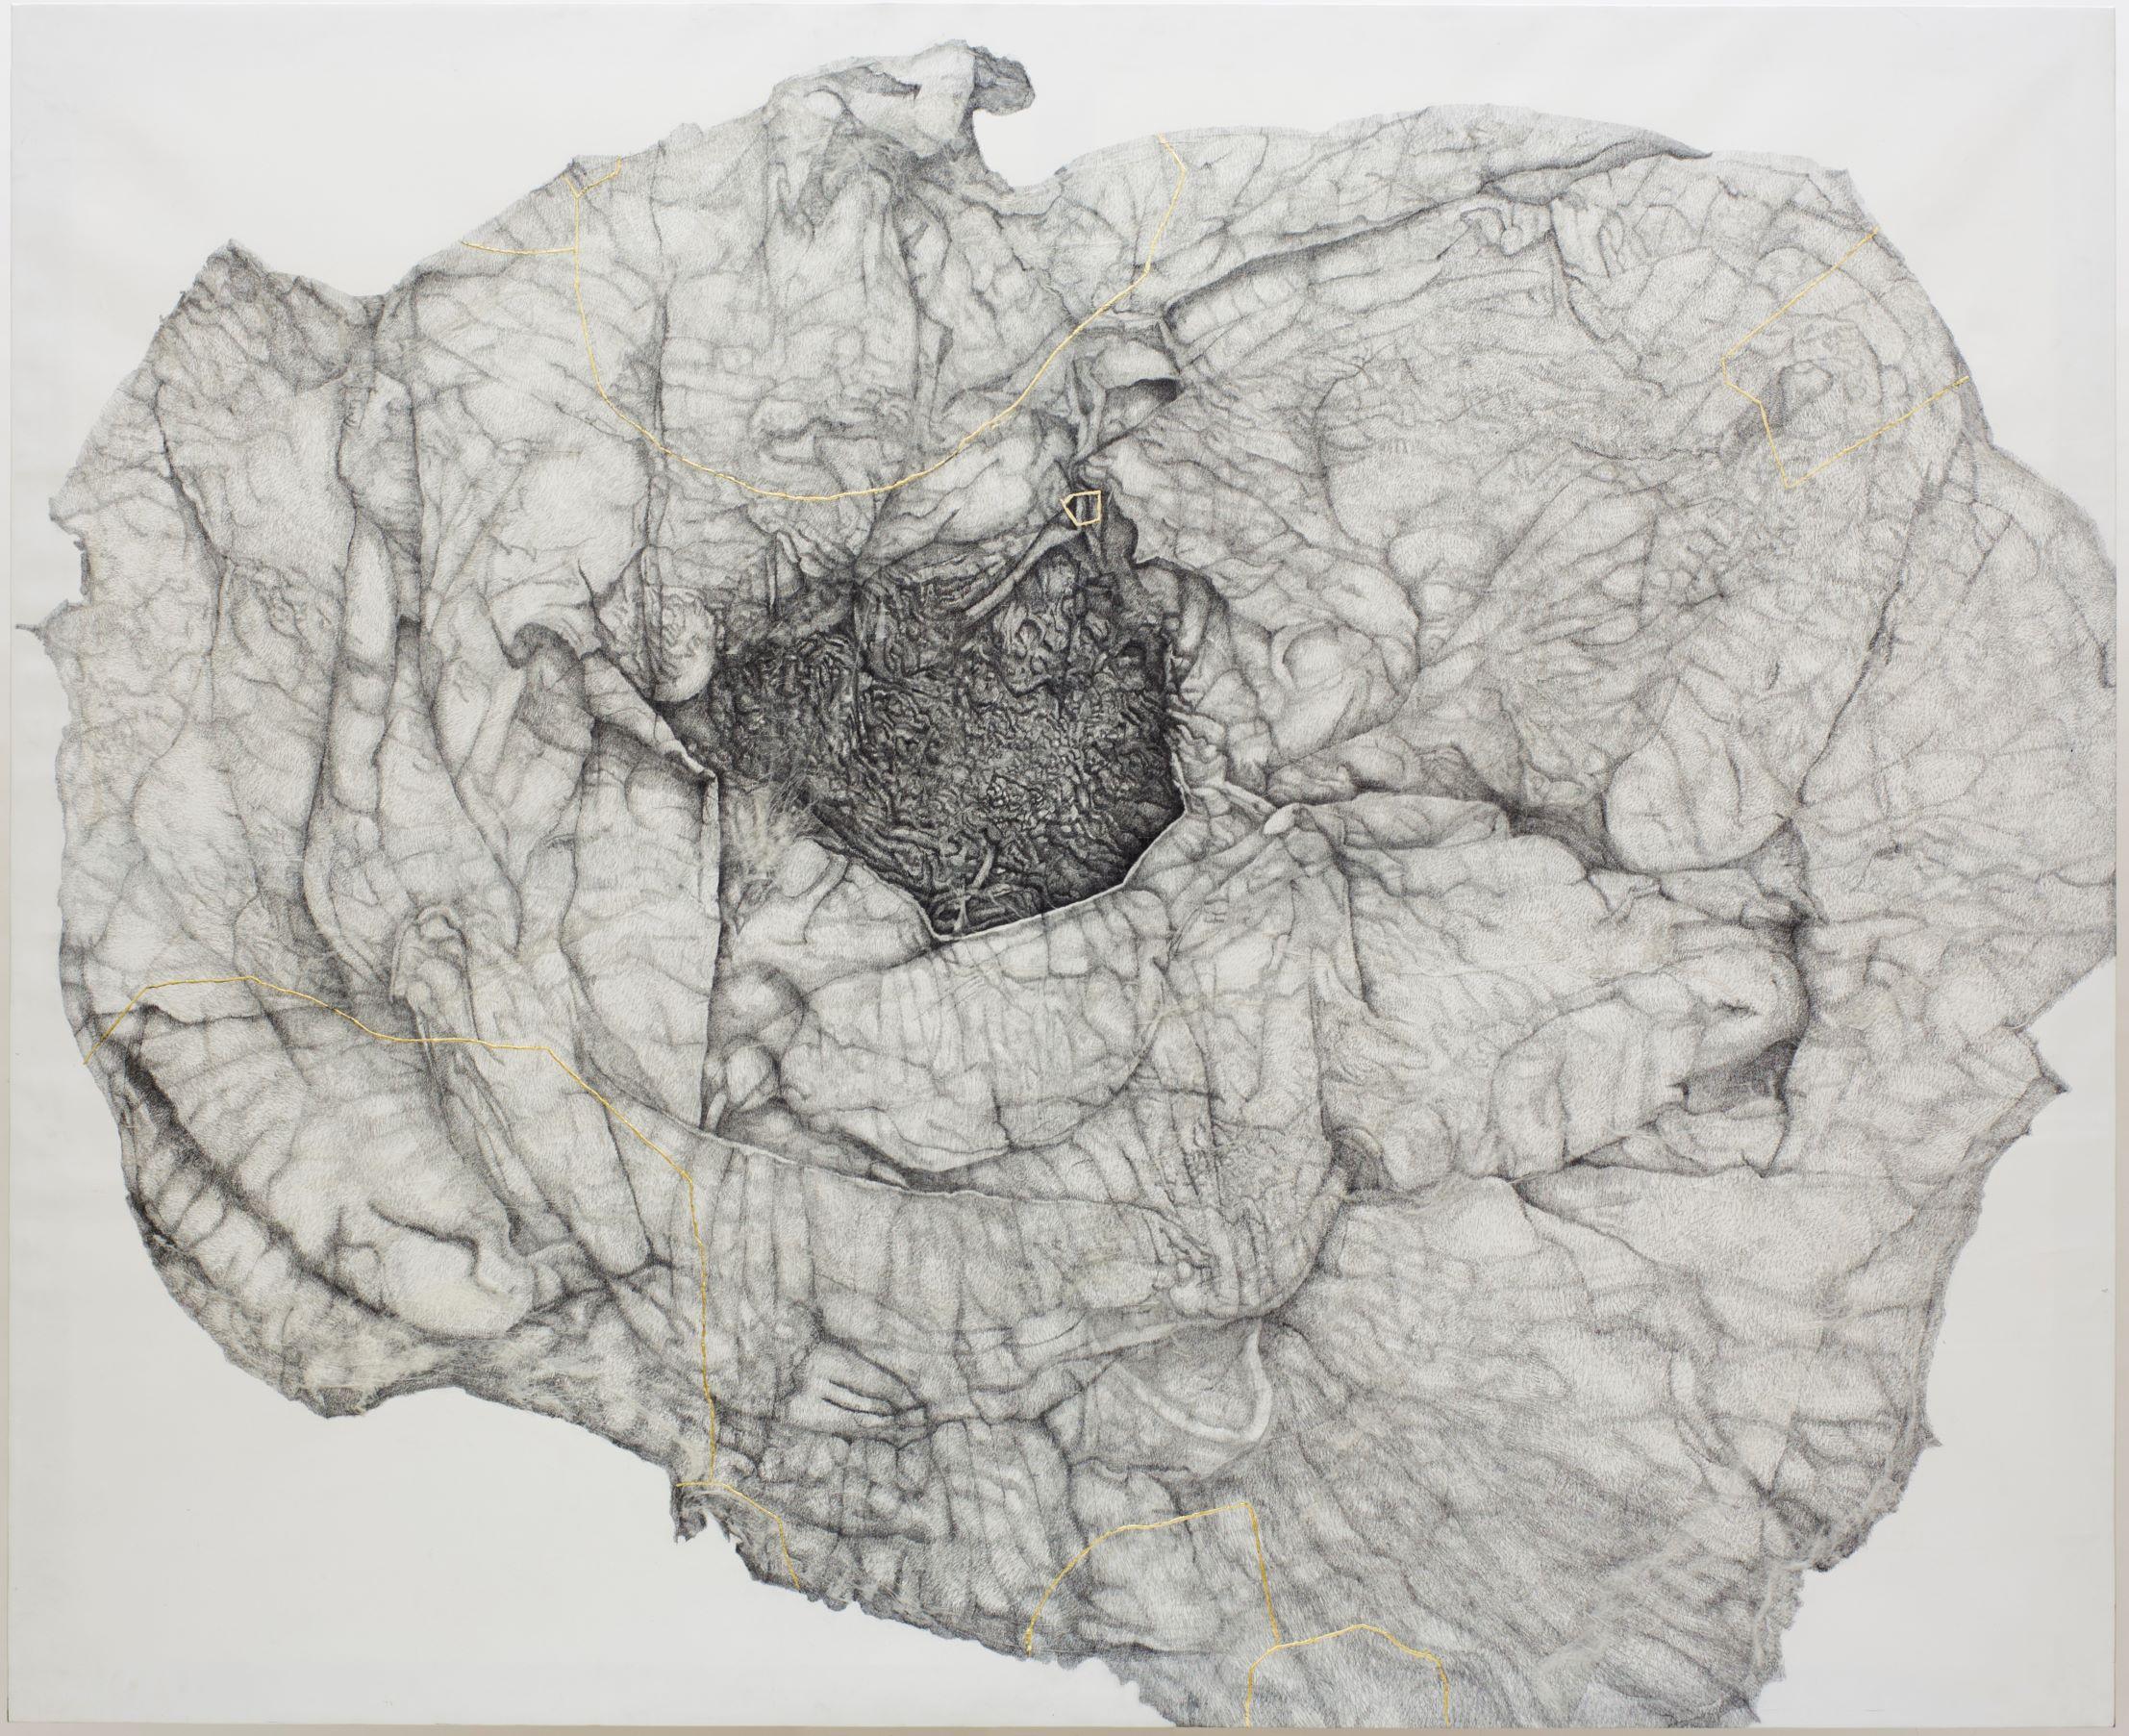 The recent series of drawings Aging / Envelhecendo is a response to the internal stimulus, one that speaks of the transformations of substance in the passage of time, with an autobiographical and observant tone. Making use of an absolute refinement